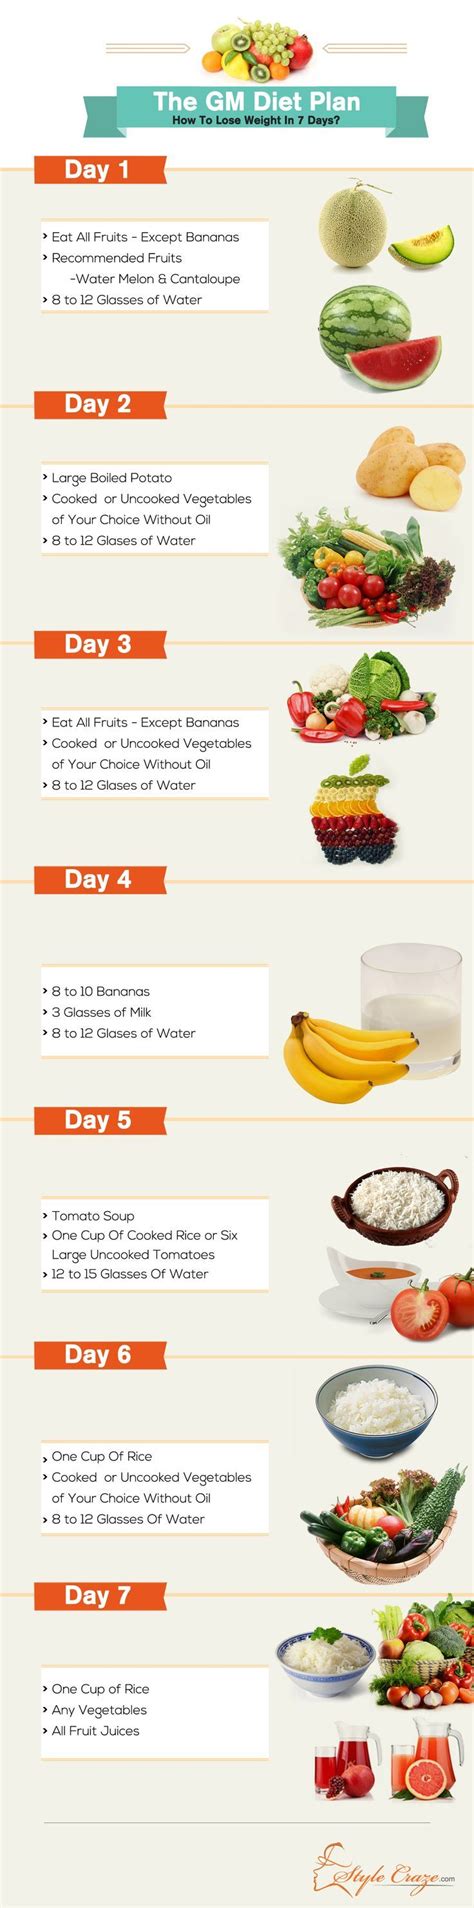 The Gm Diet Plan How To Lose Weight In Just 7 Days To Lose Diet